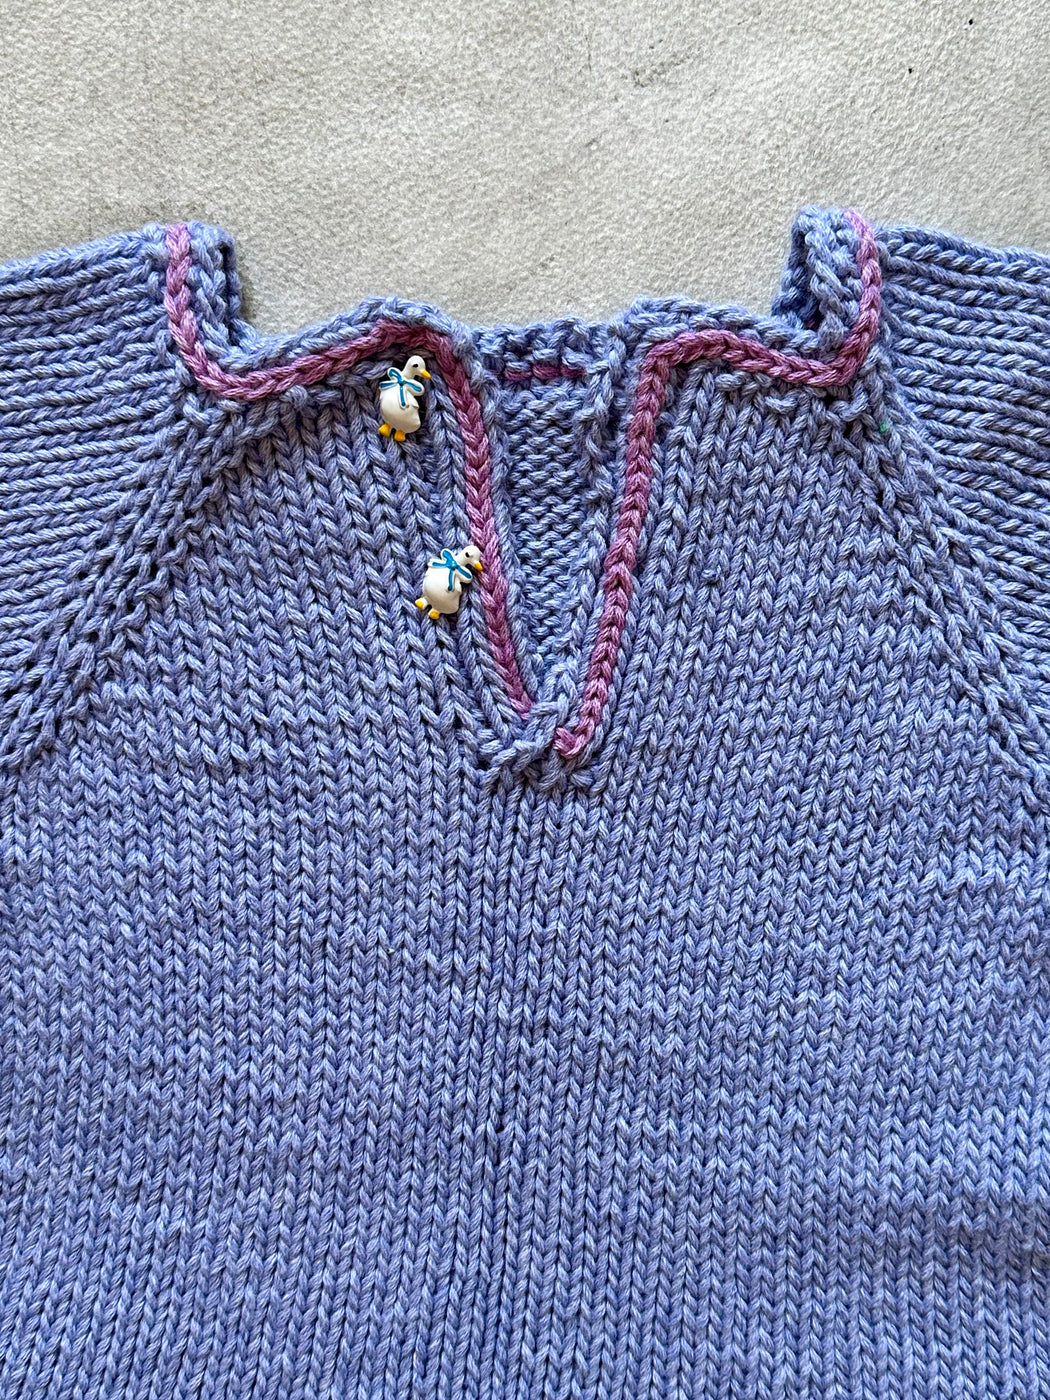 Hand-Knitted Cotton Baby Dress by Albo - Blue & Lilac